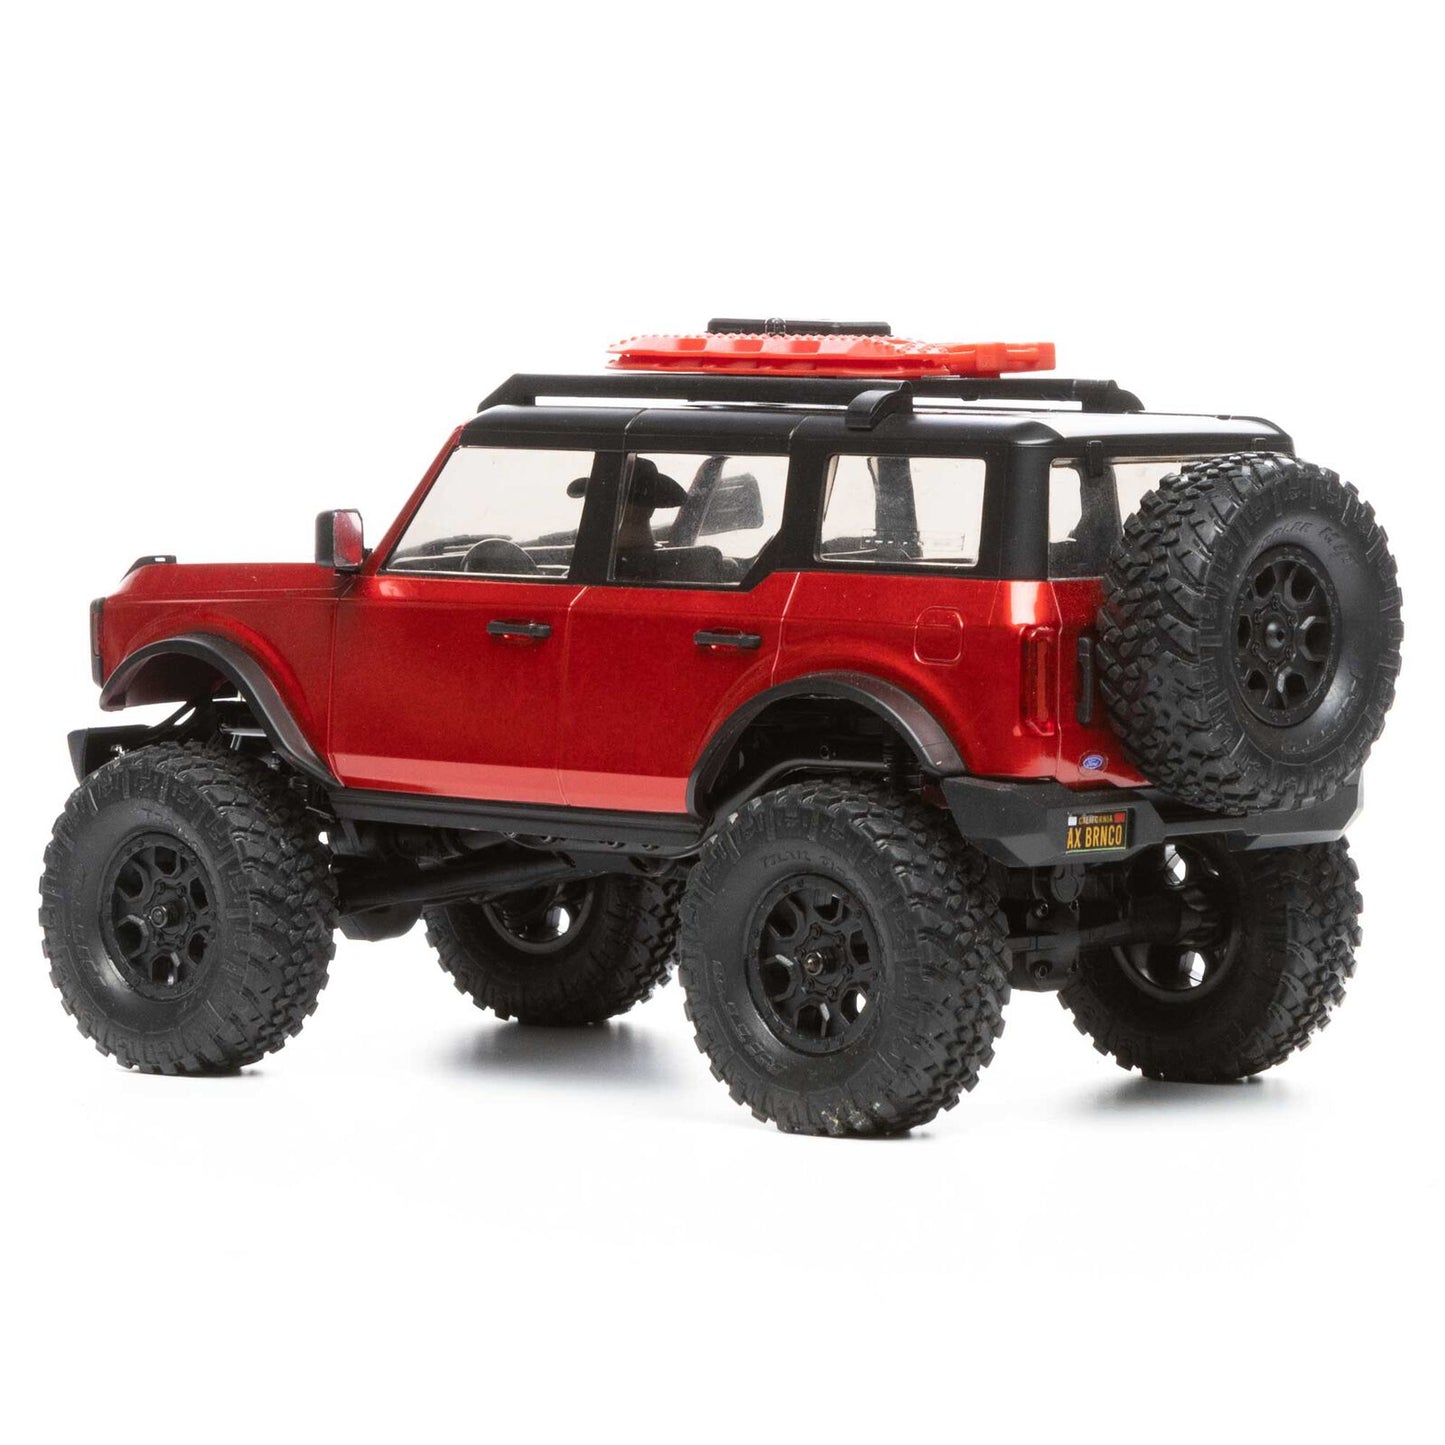 SCX 24 Bronco Red 1/24th Scale Crawler Package